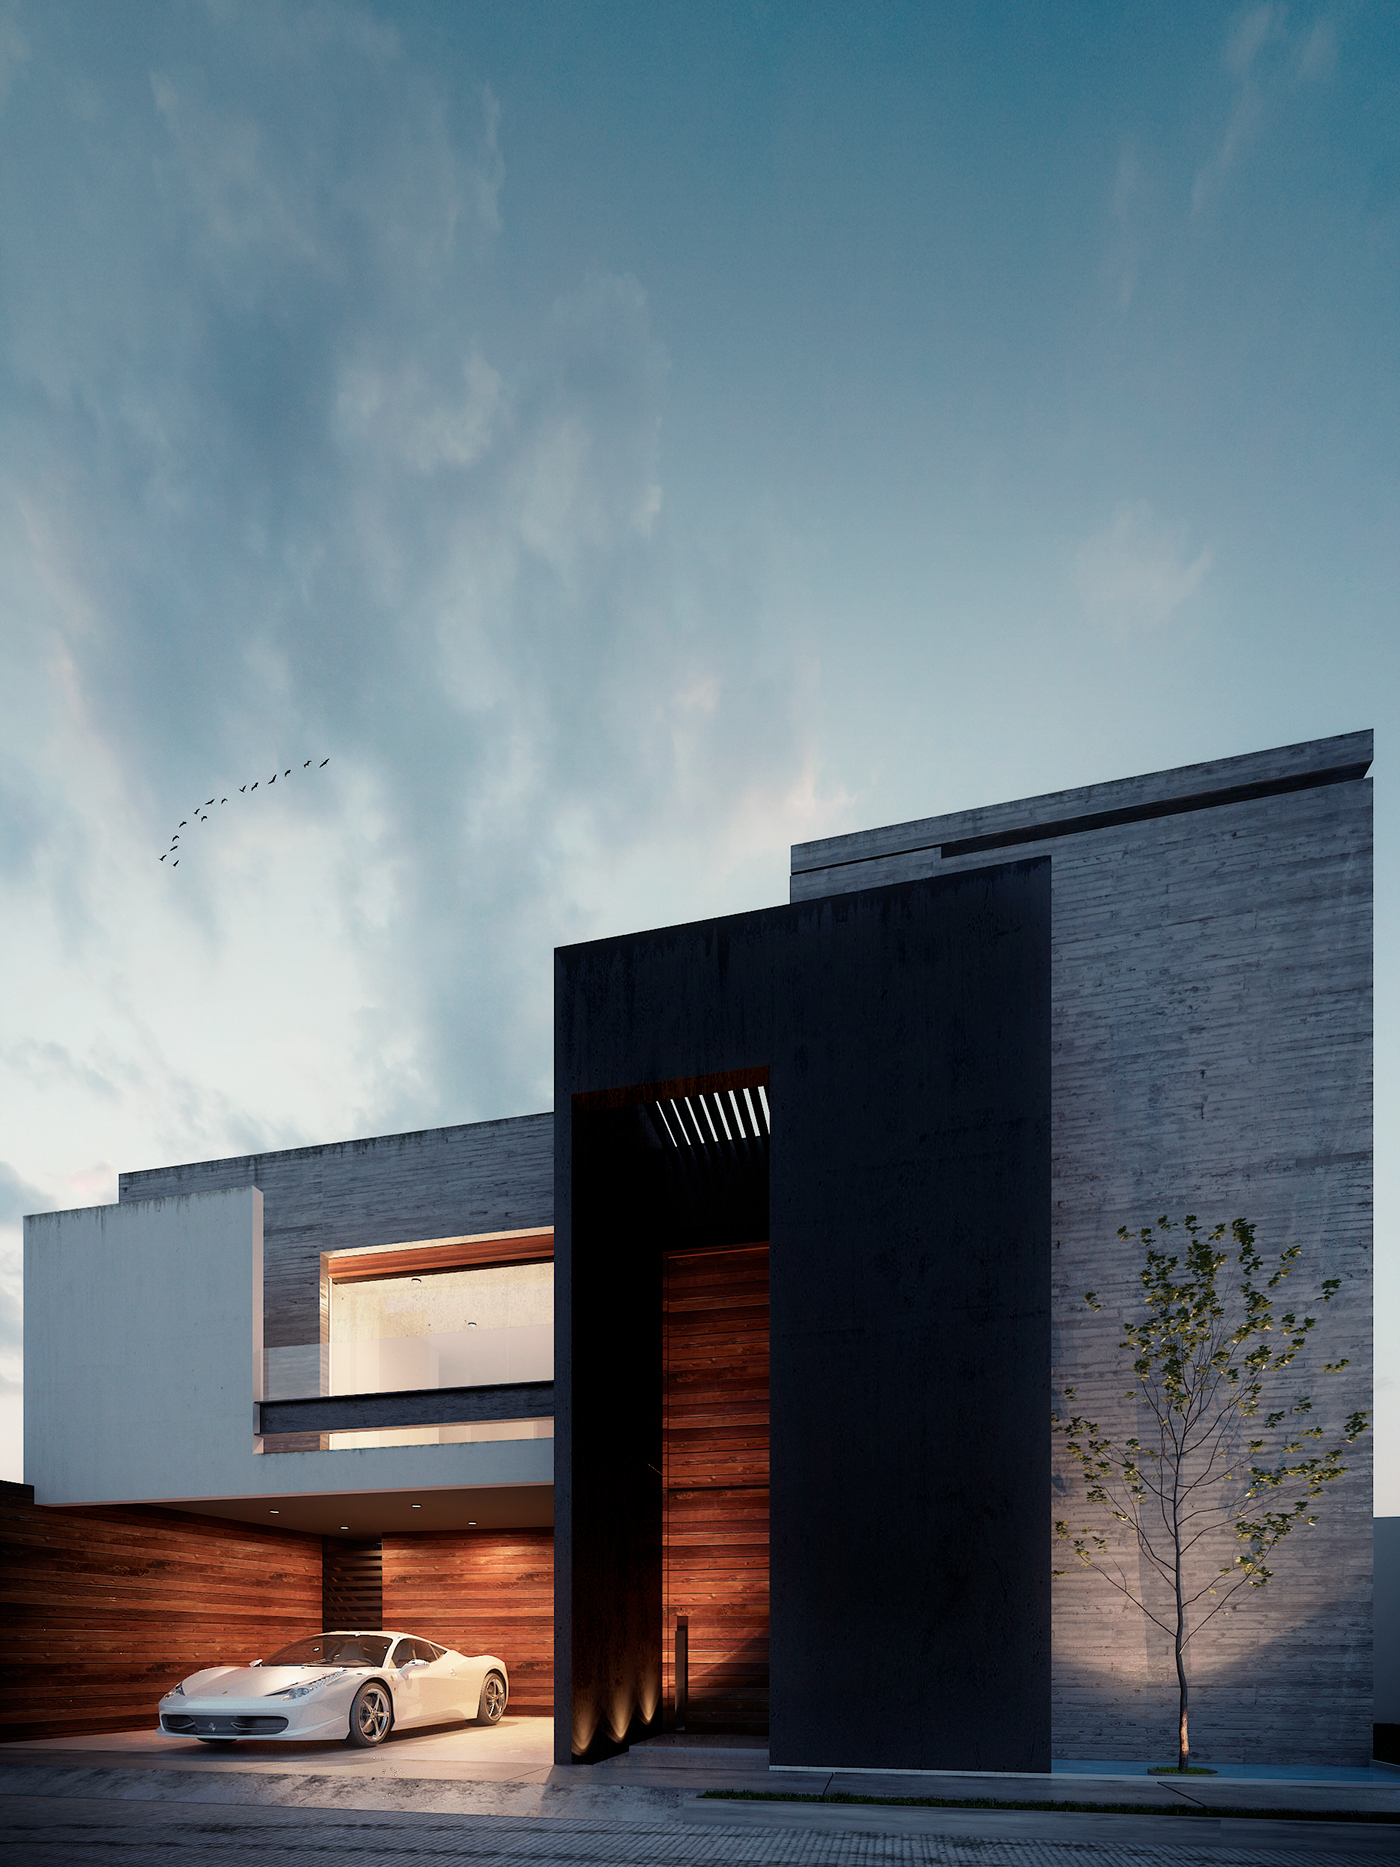 #architecture #vray #exterior #desing